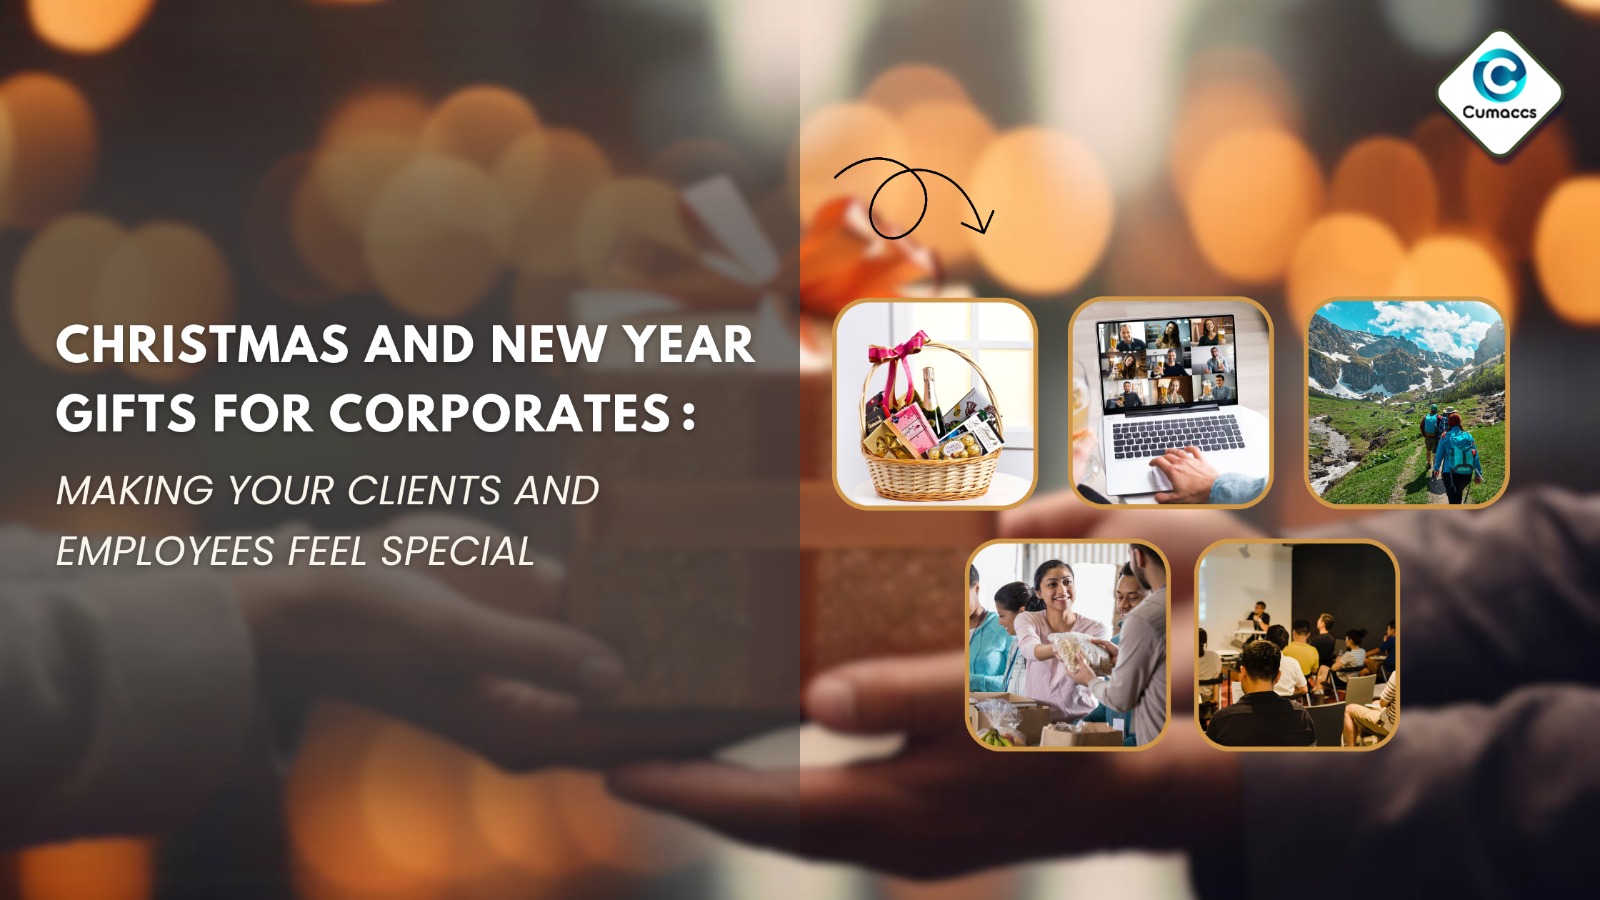 You are currently viewing Corporate Christmas and New Year Gifting for Corporate : Making Your Clients and Employees Feel Special